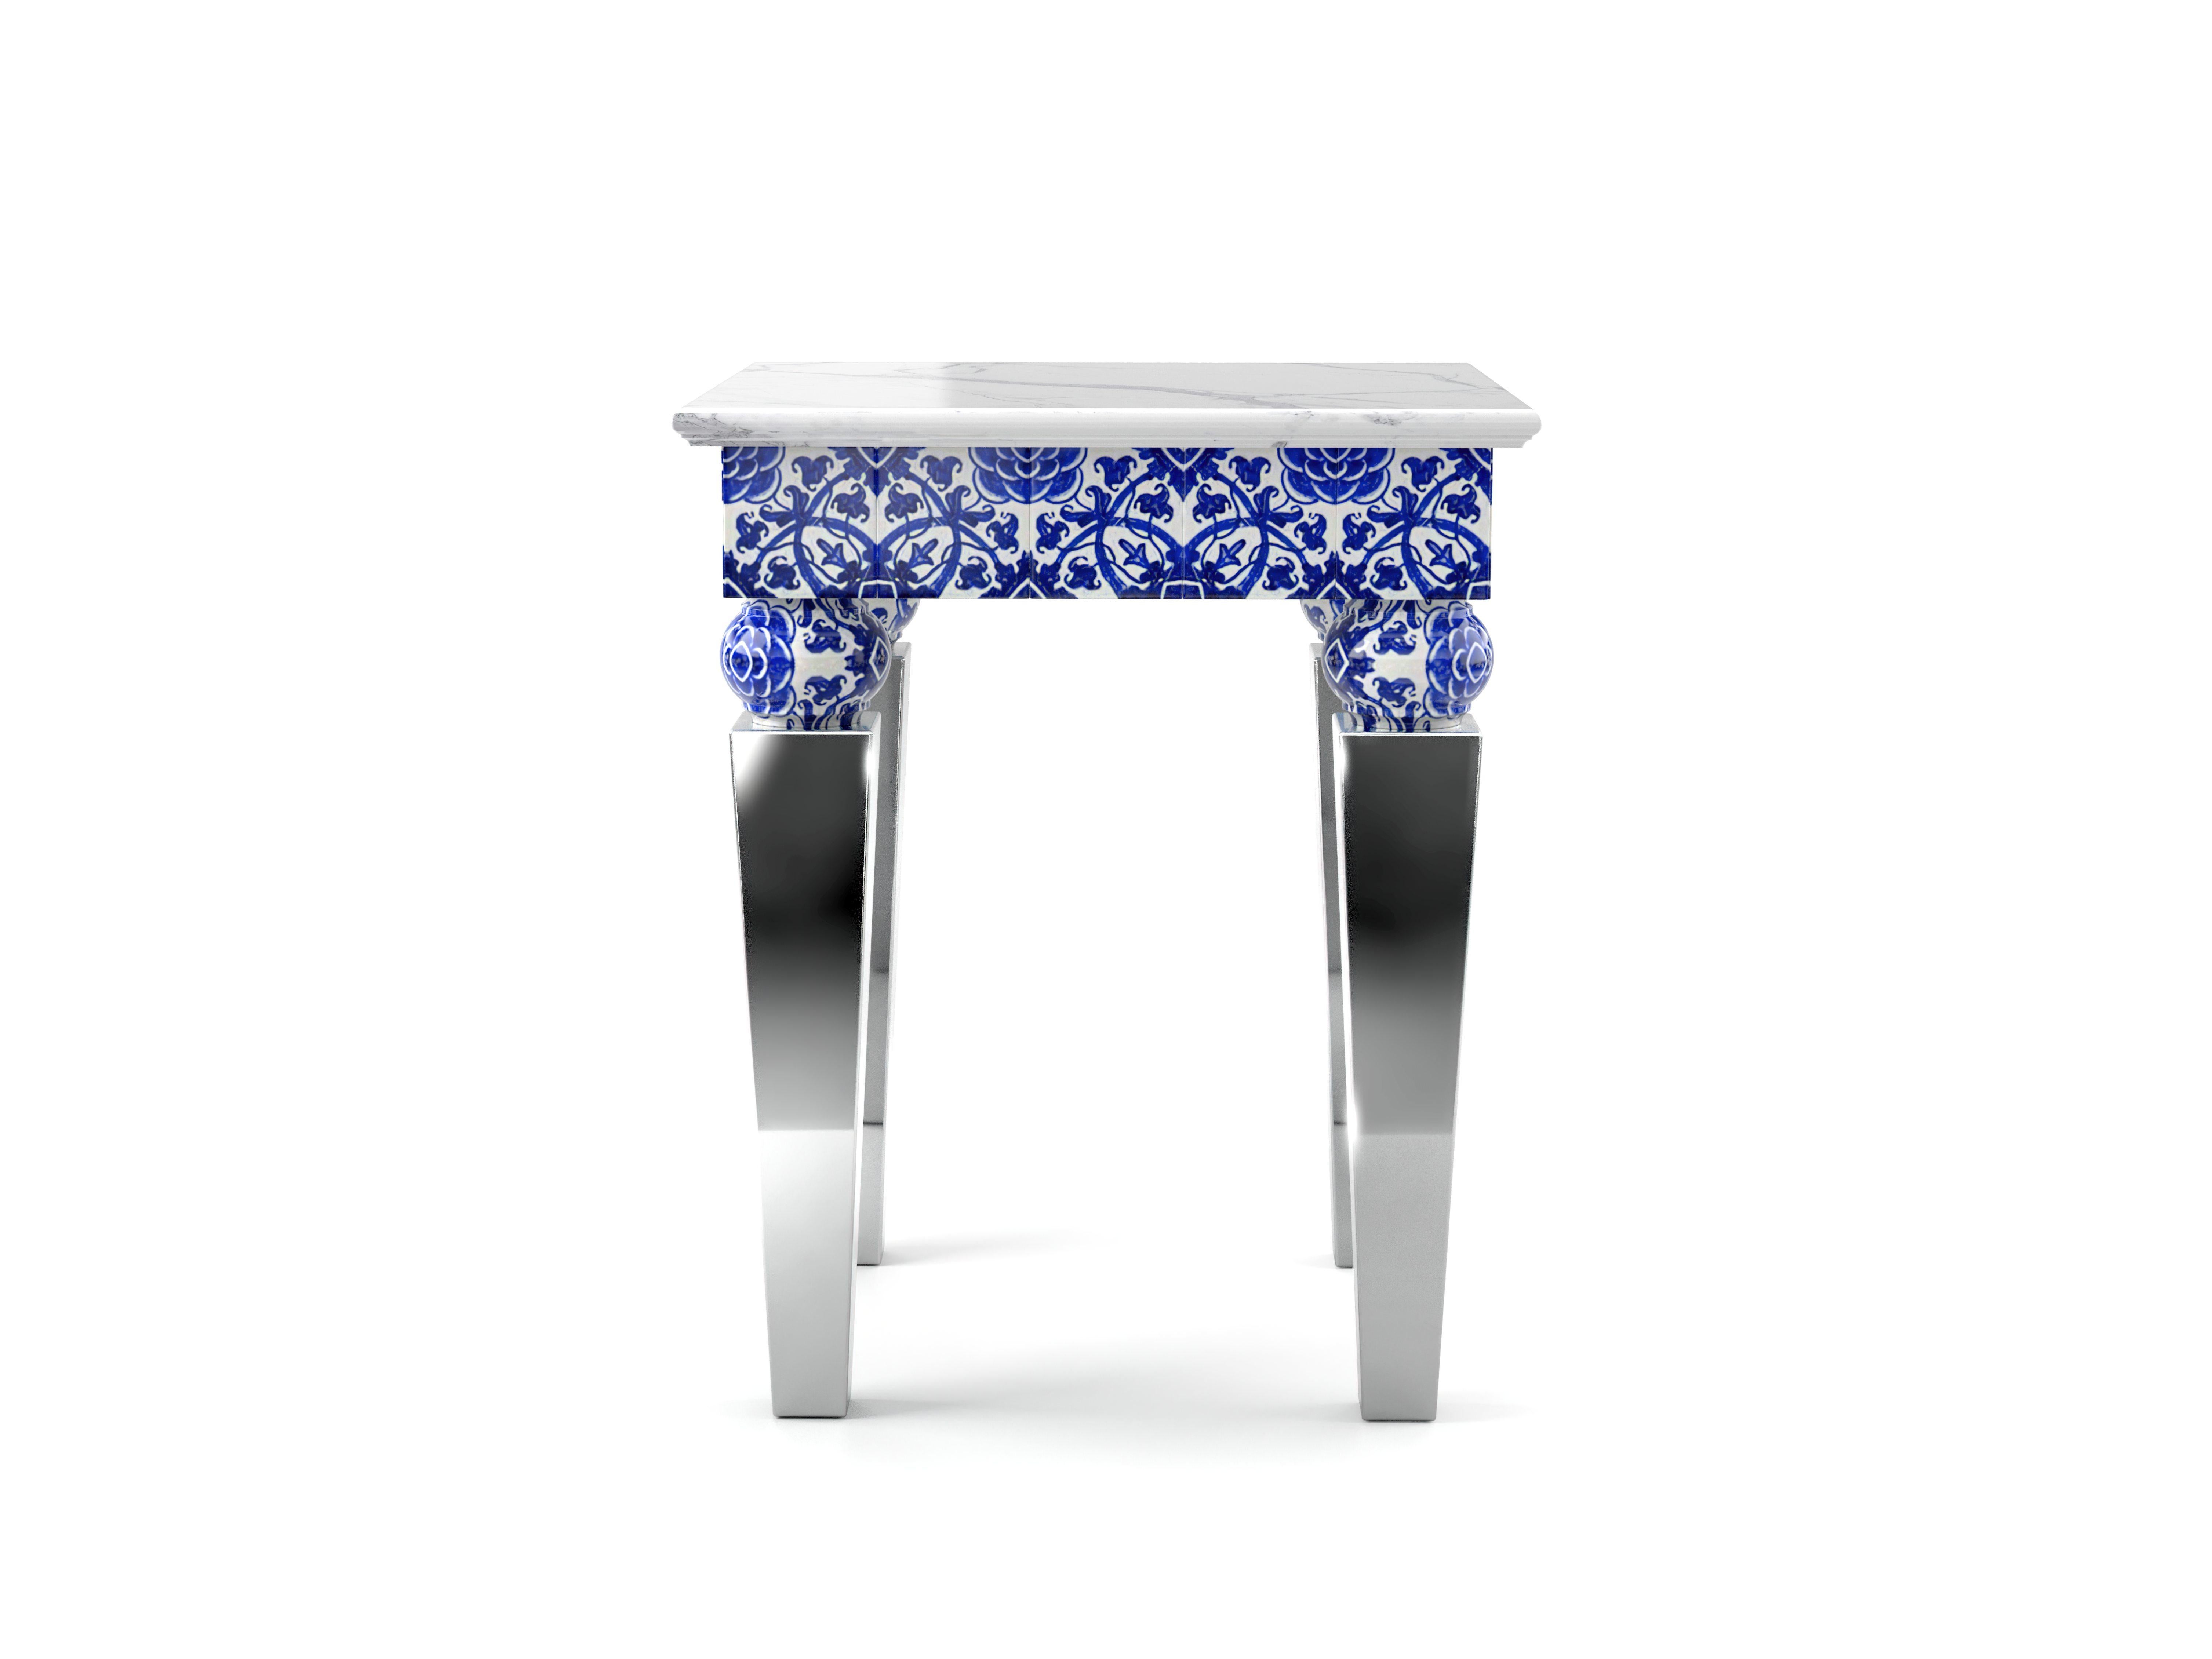 Italian Side Table White Marble Top Mirror Steel Legs, Blue Majolica Tiles Also Outdoor For Sale